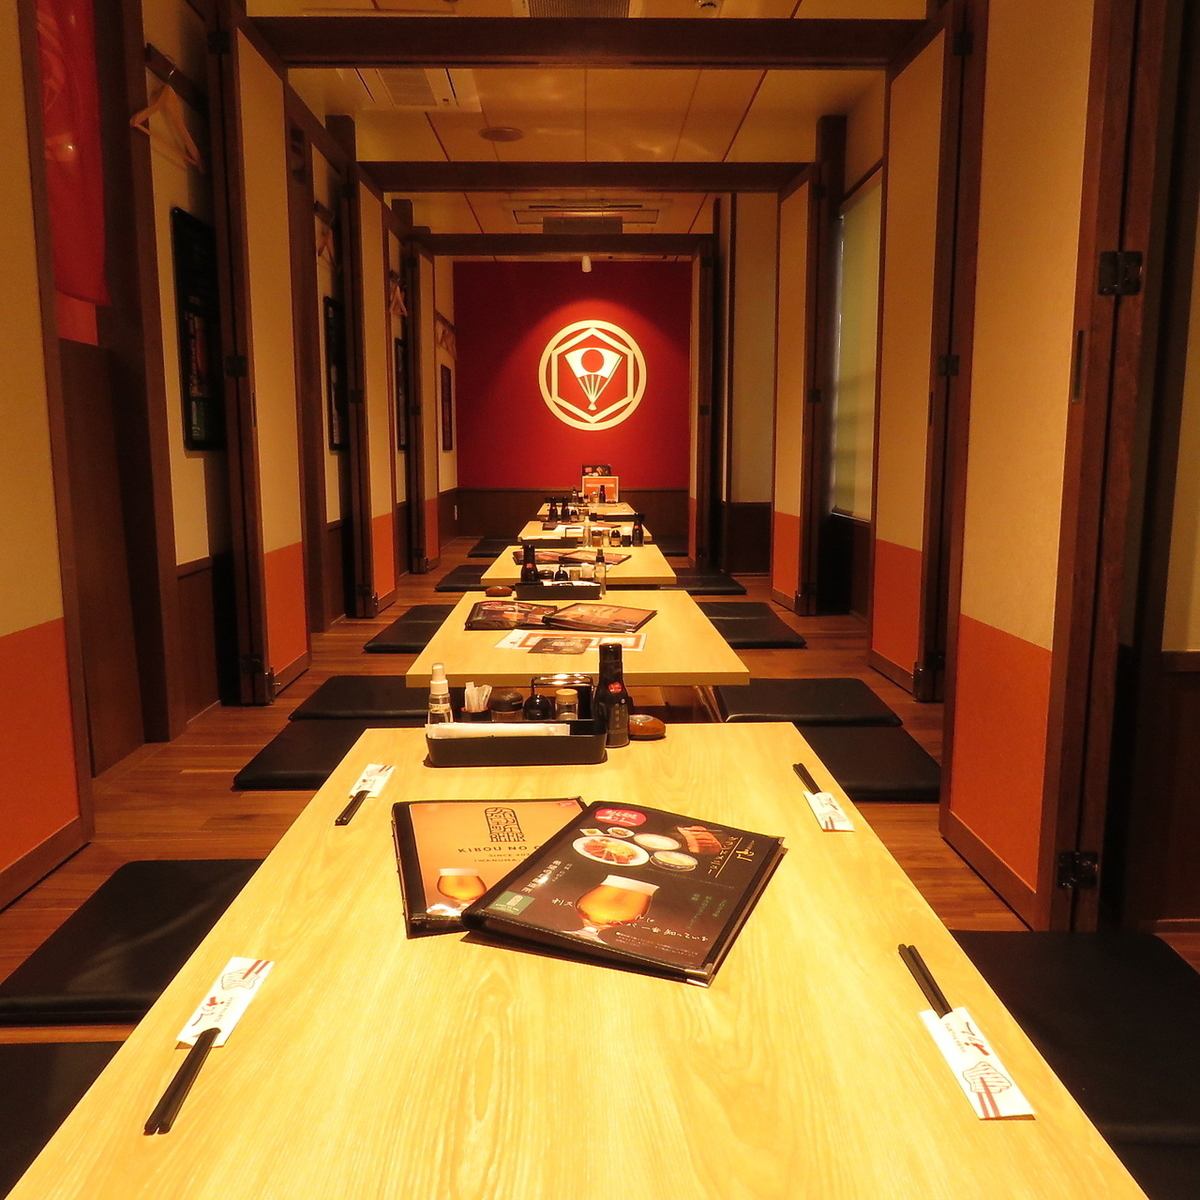 We have private rooms that can accommodate large banquets such as corporate banquets!